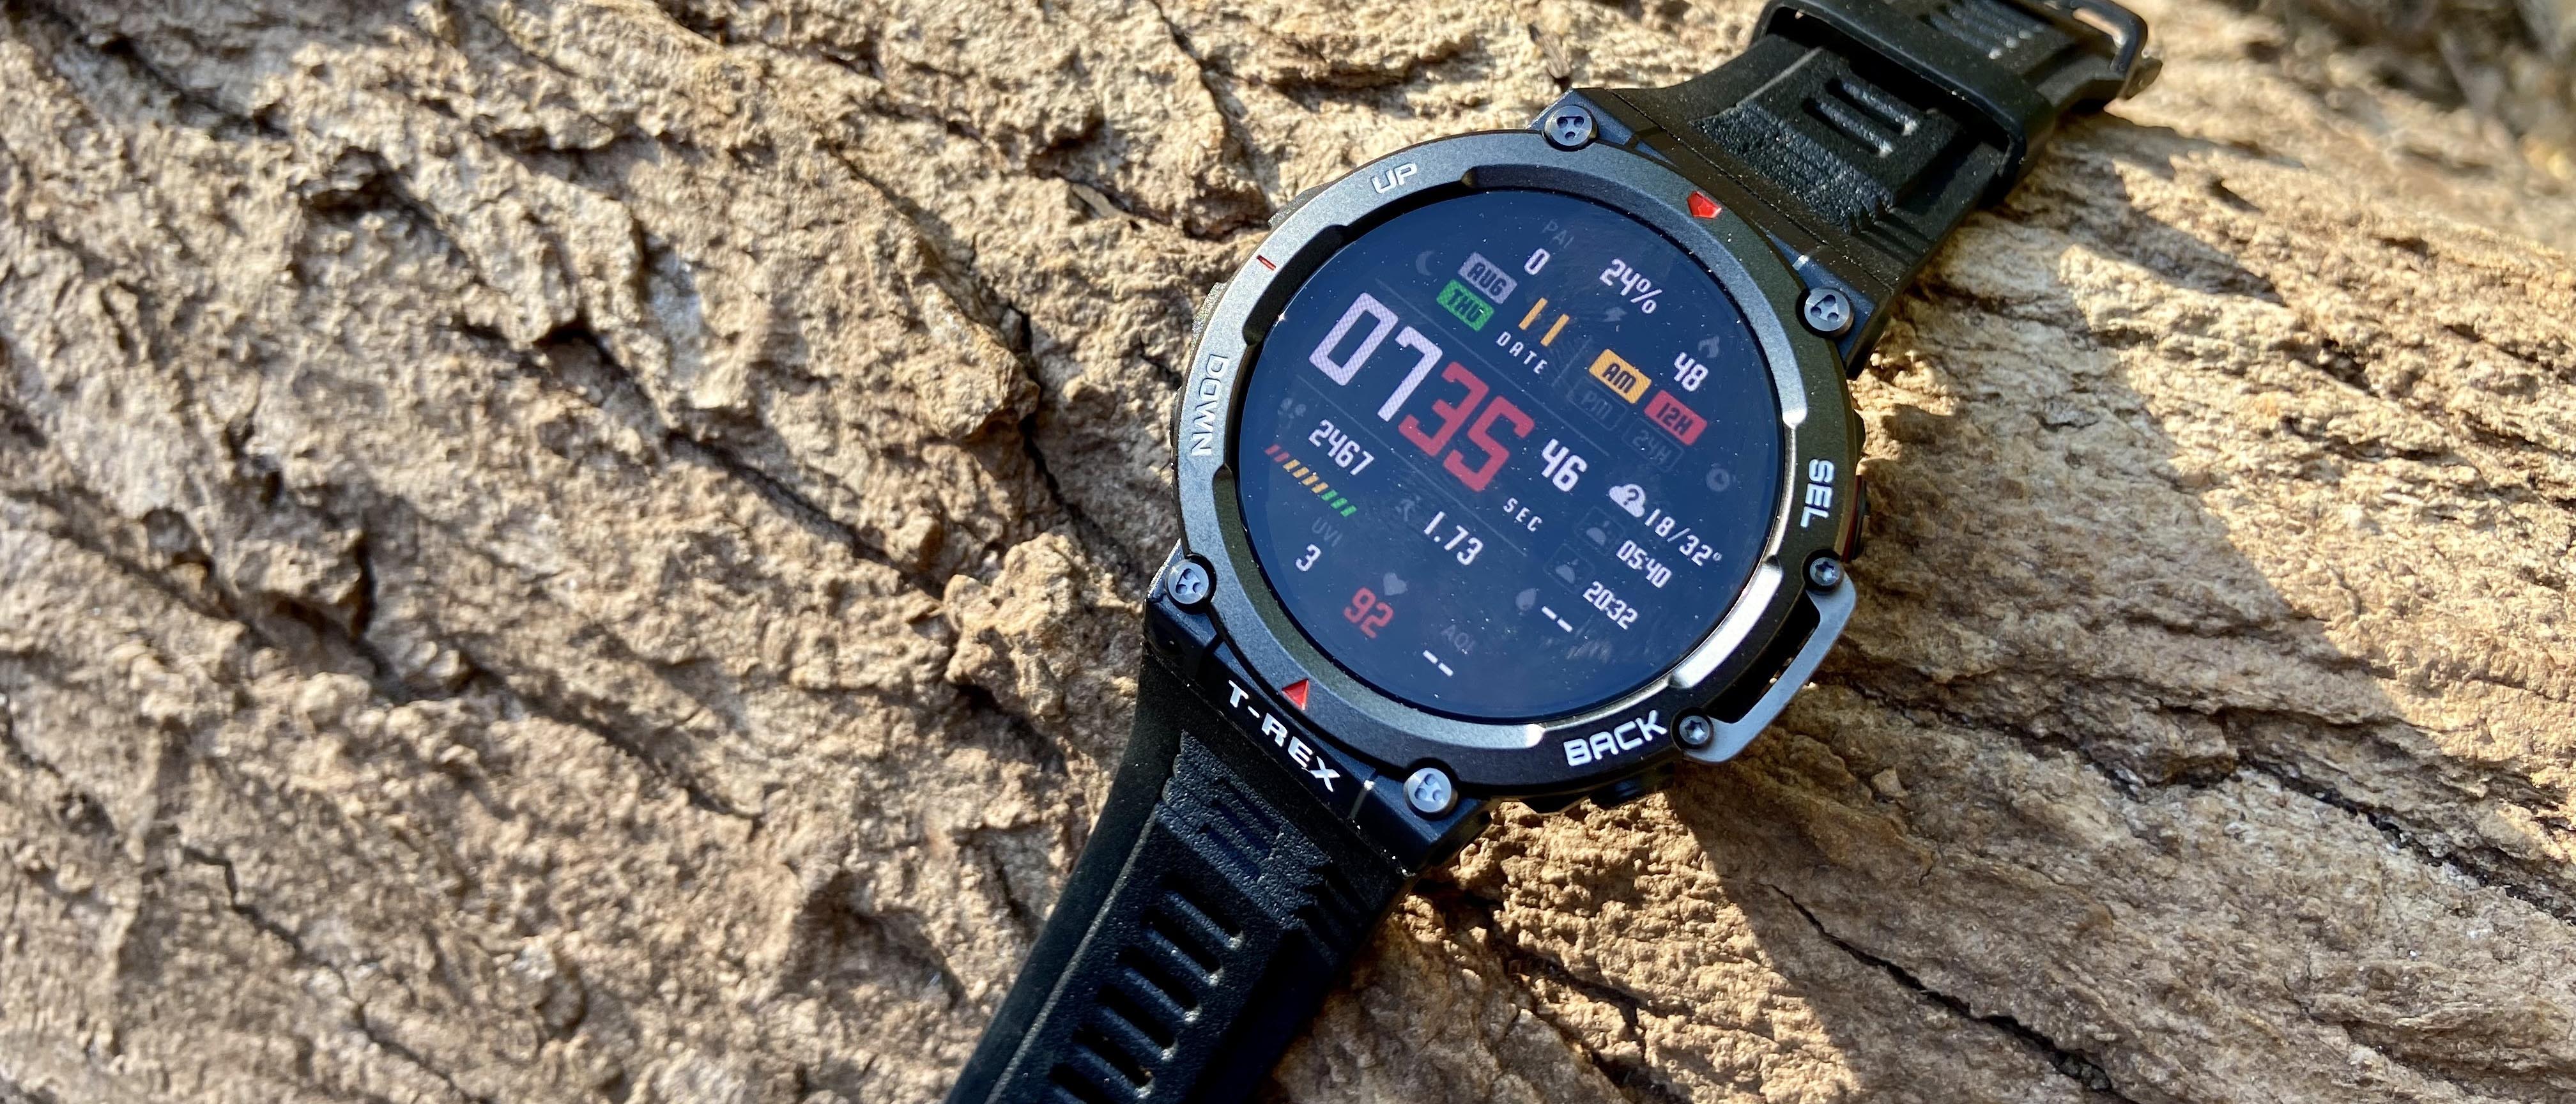 Amazfit TRex 2 review: a rugged adventure watch, at an excellent